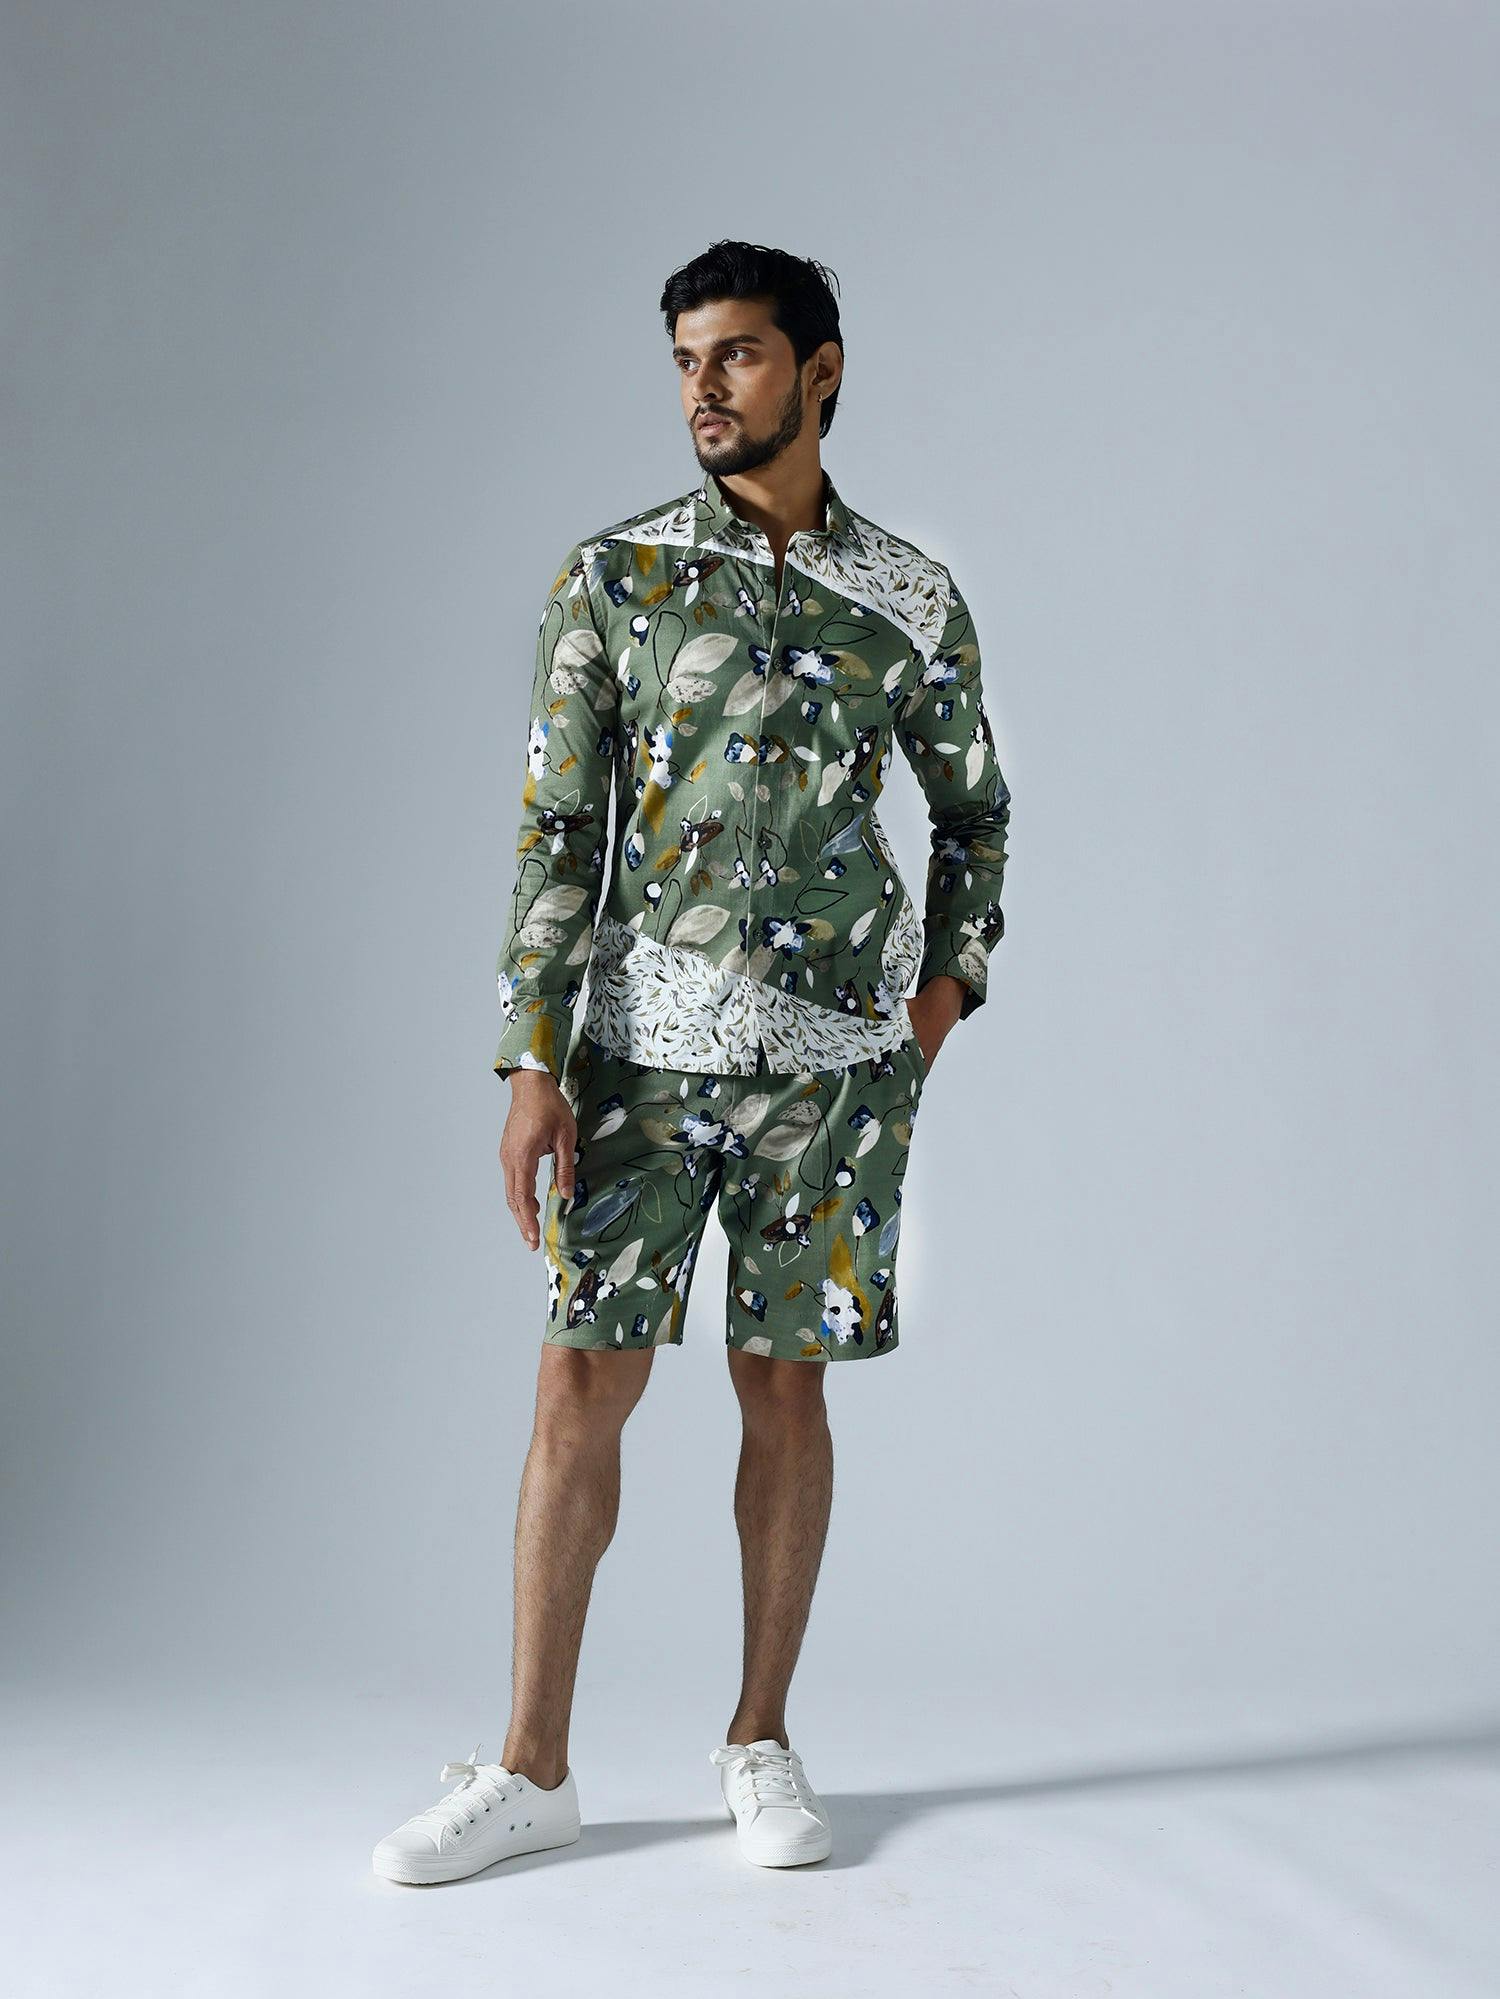 Vivid Green And Pixelated White Full sleeves Shirt With Shorts, a product by KLAD